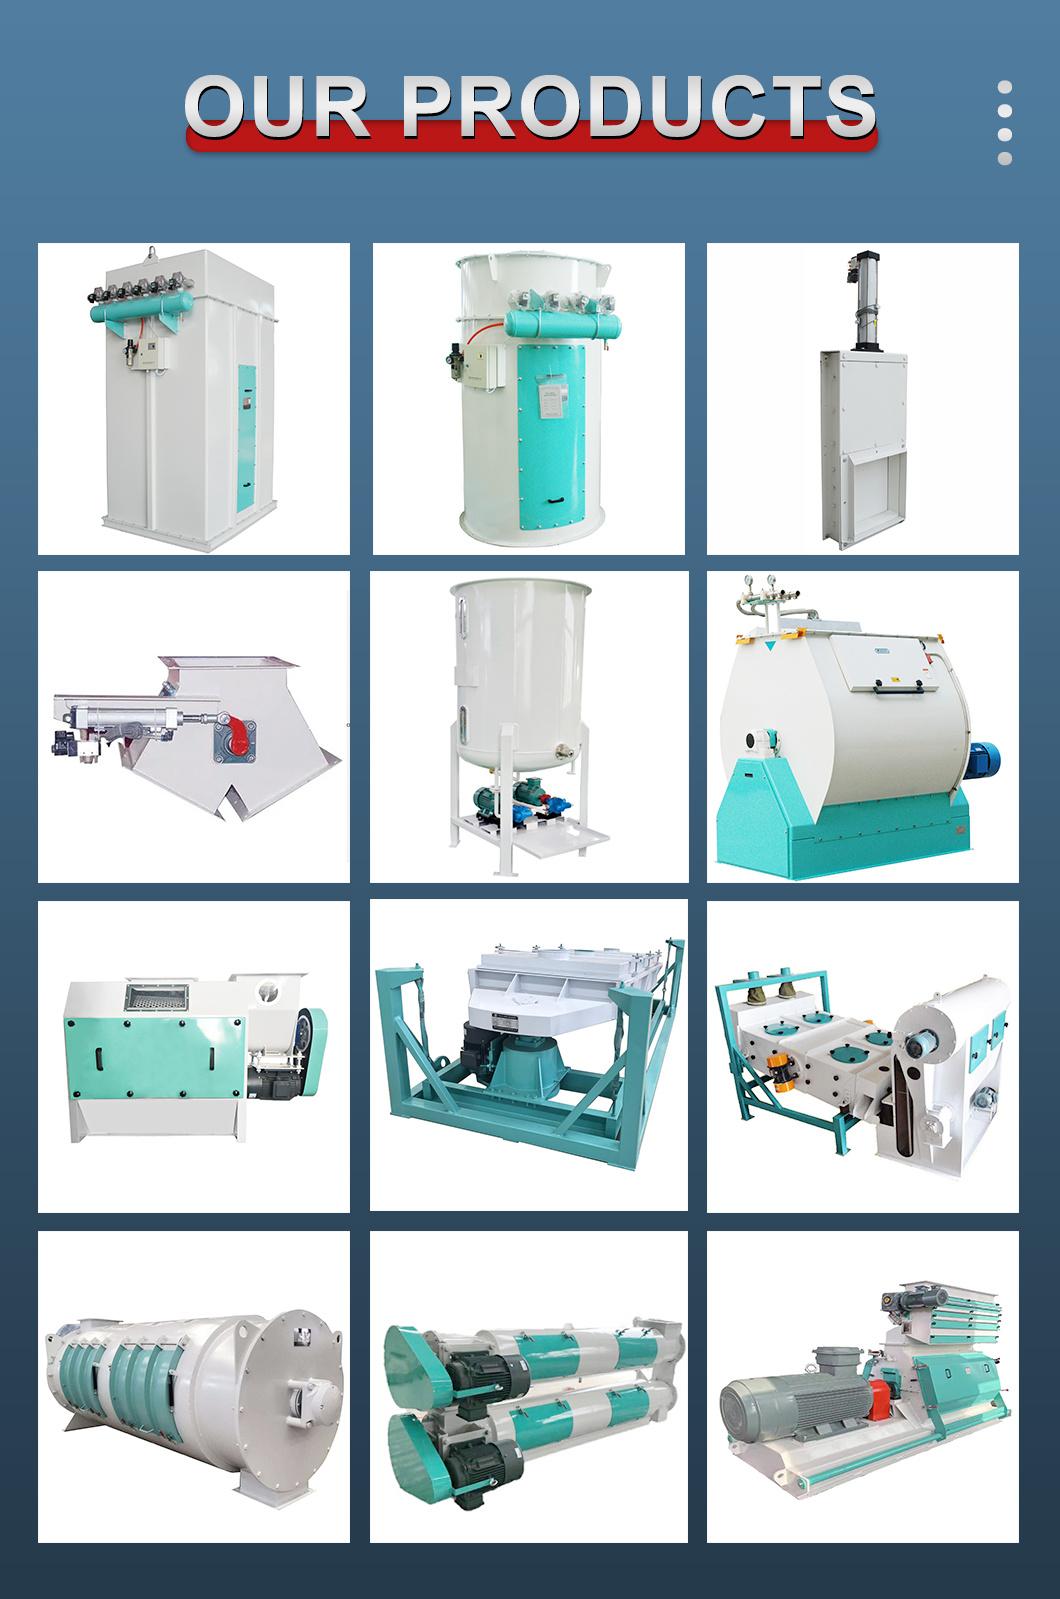 High Quality Grinder Feed Processing Machine Wide Hammer Mill